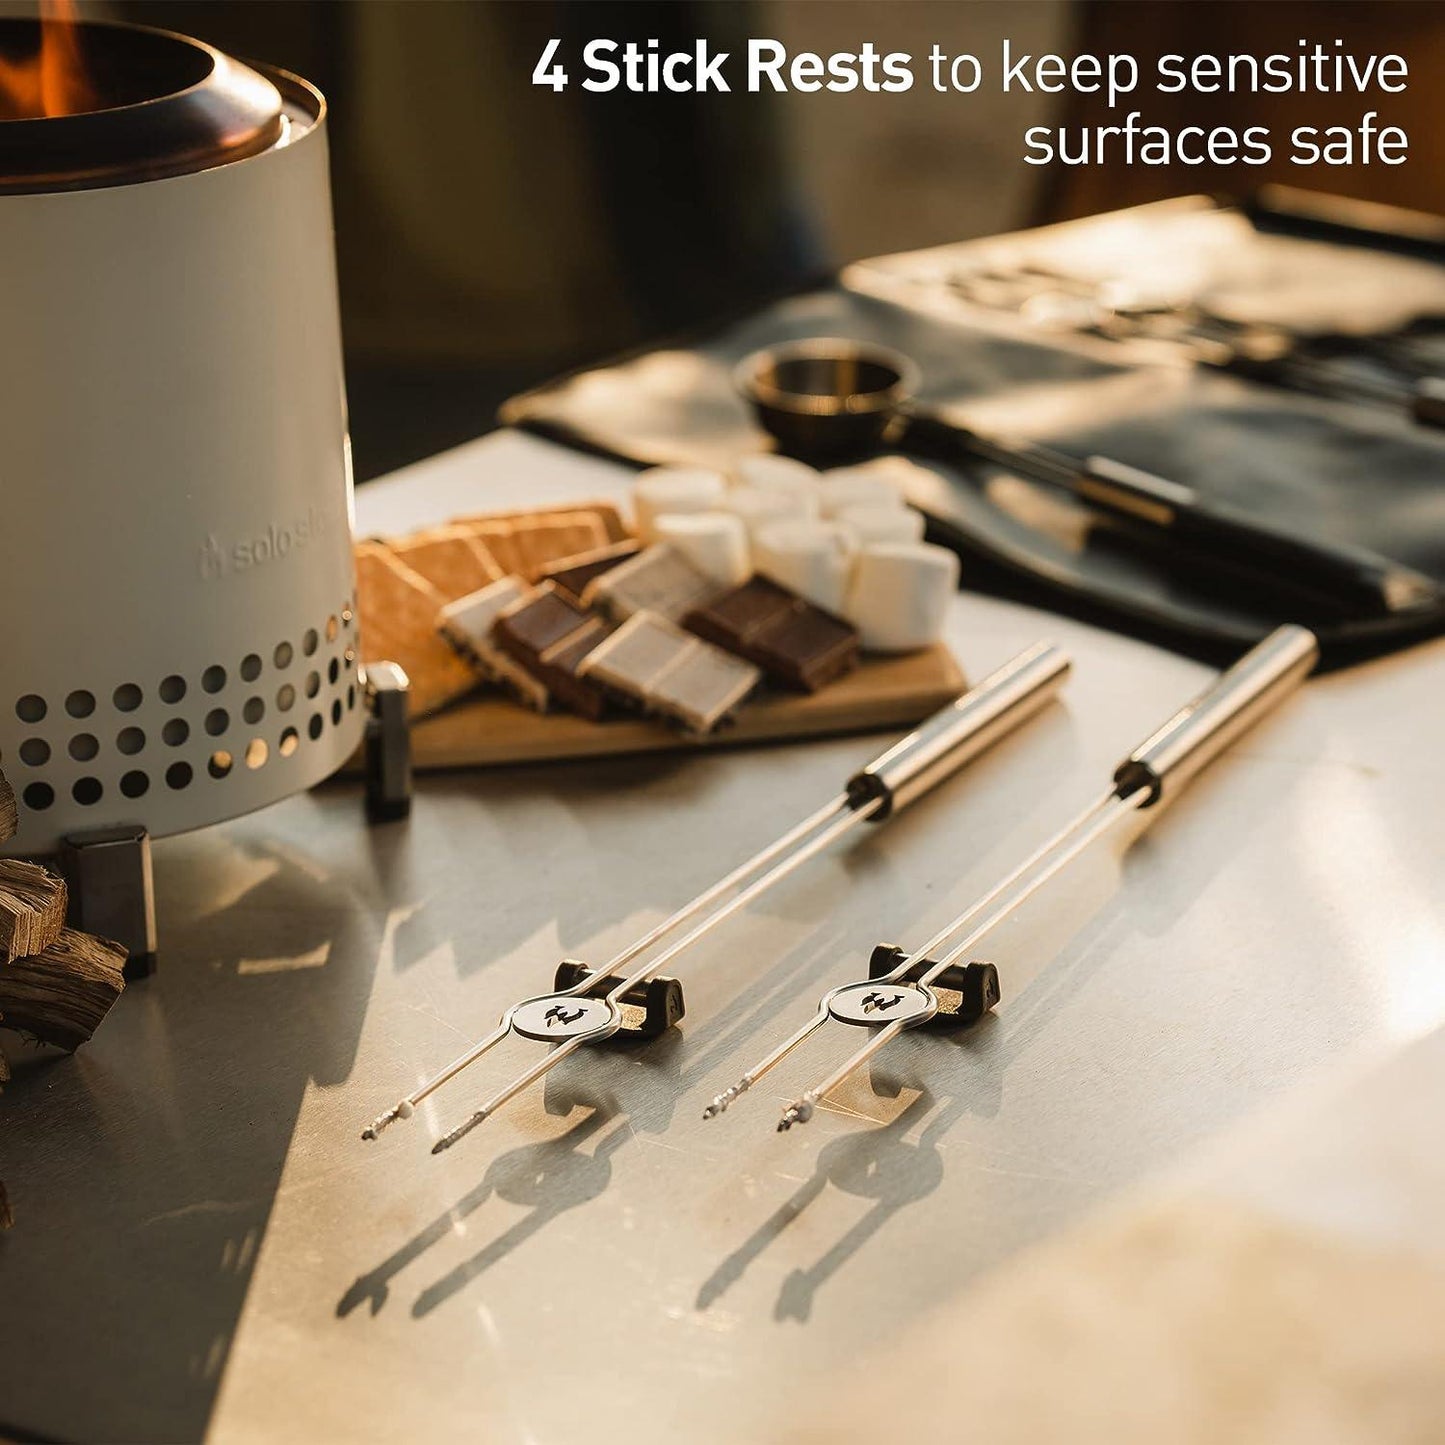 Solo Stove Mesa/Mesa XL Accessory Pack | Incl. 4 Stainless Steel Mini Sticks + Stick Rests, Pellet Scoop, Mesa Lid, Carry Case, Accessories for Outdoor Fire Pit - TRAPSKI, LLC